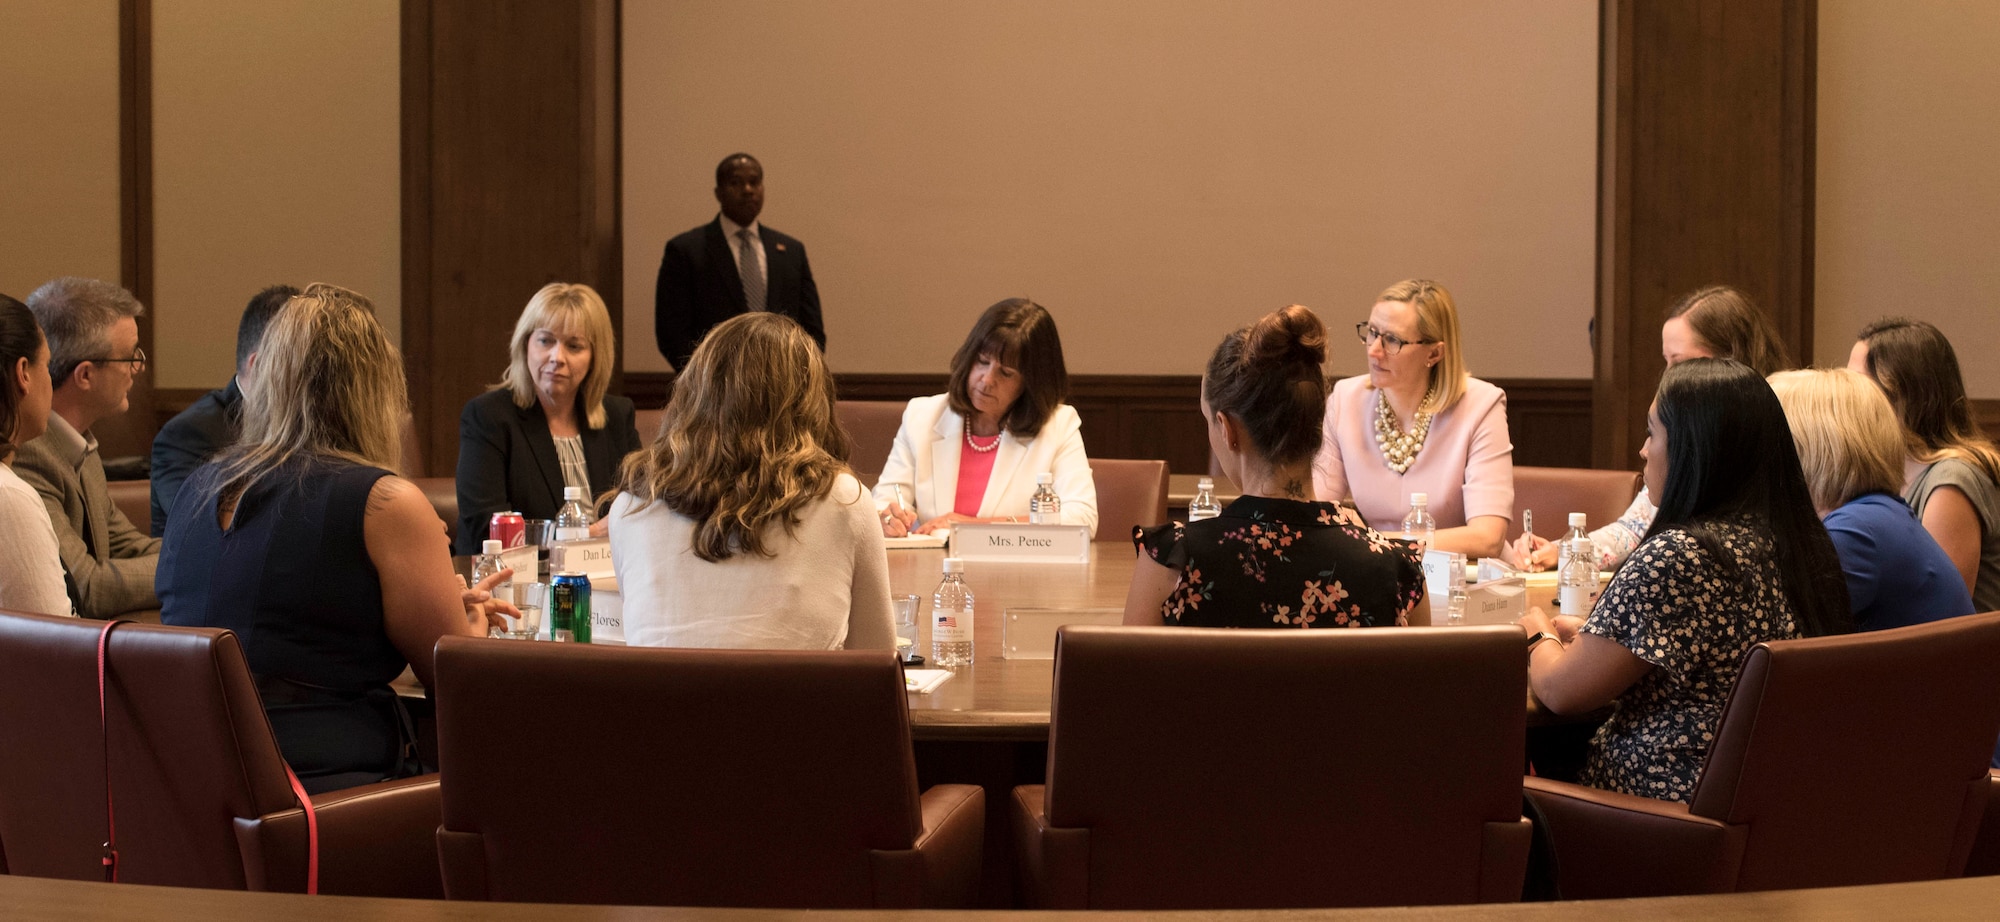 Second Lady Karen Pence speaks with military spouses from all branches about experiences and challenges they face as wives and husbands of service members, Friday, May 4, 2018, at the George W. Bush Presidential Center, Dallas, Texas. Pence has visited other locations to speak with military spouses, including Luke Air Force Base, Arizona and Yokota Air Base, Japan. (U.S. Air Force photos by Tech. Sgt. Melissa Harvey)